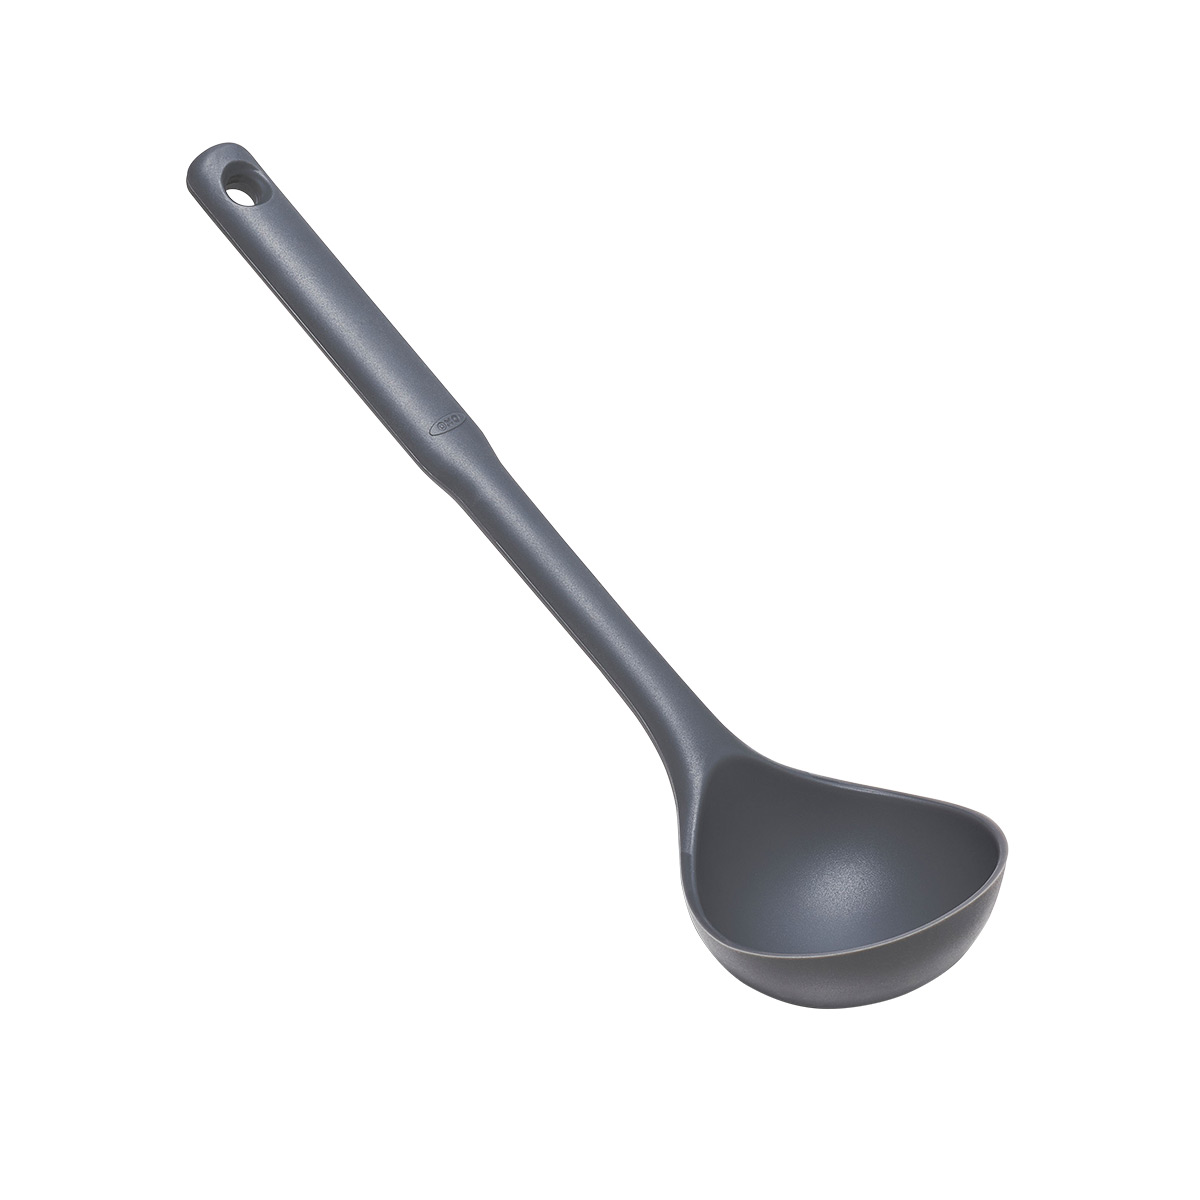 New OXO Good Grips Grey Silicone Utensils - Set of 3 Spoon, Ladle